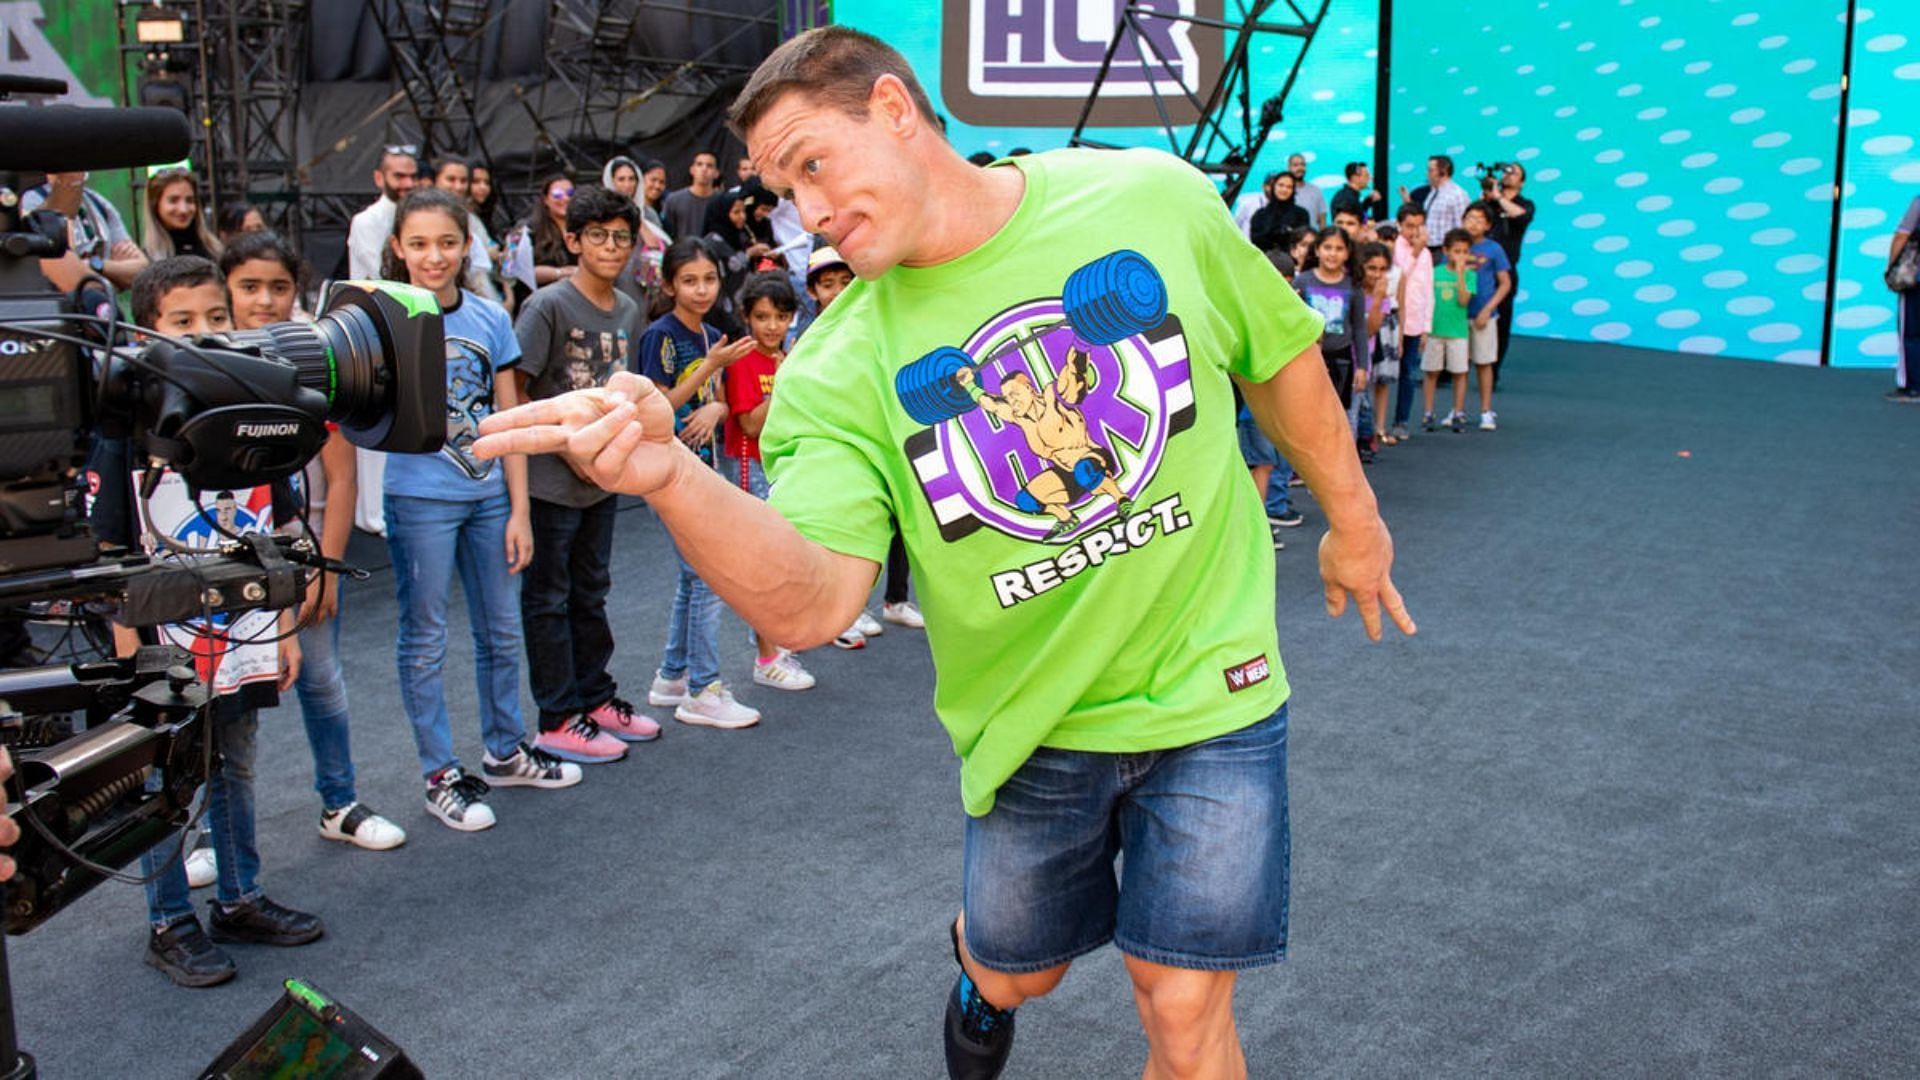 John Cena has made quite the name for himself in Hollywood